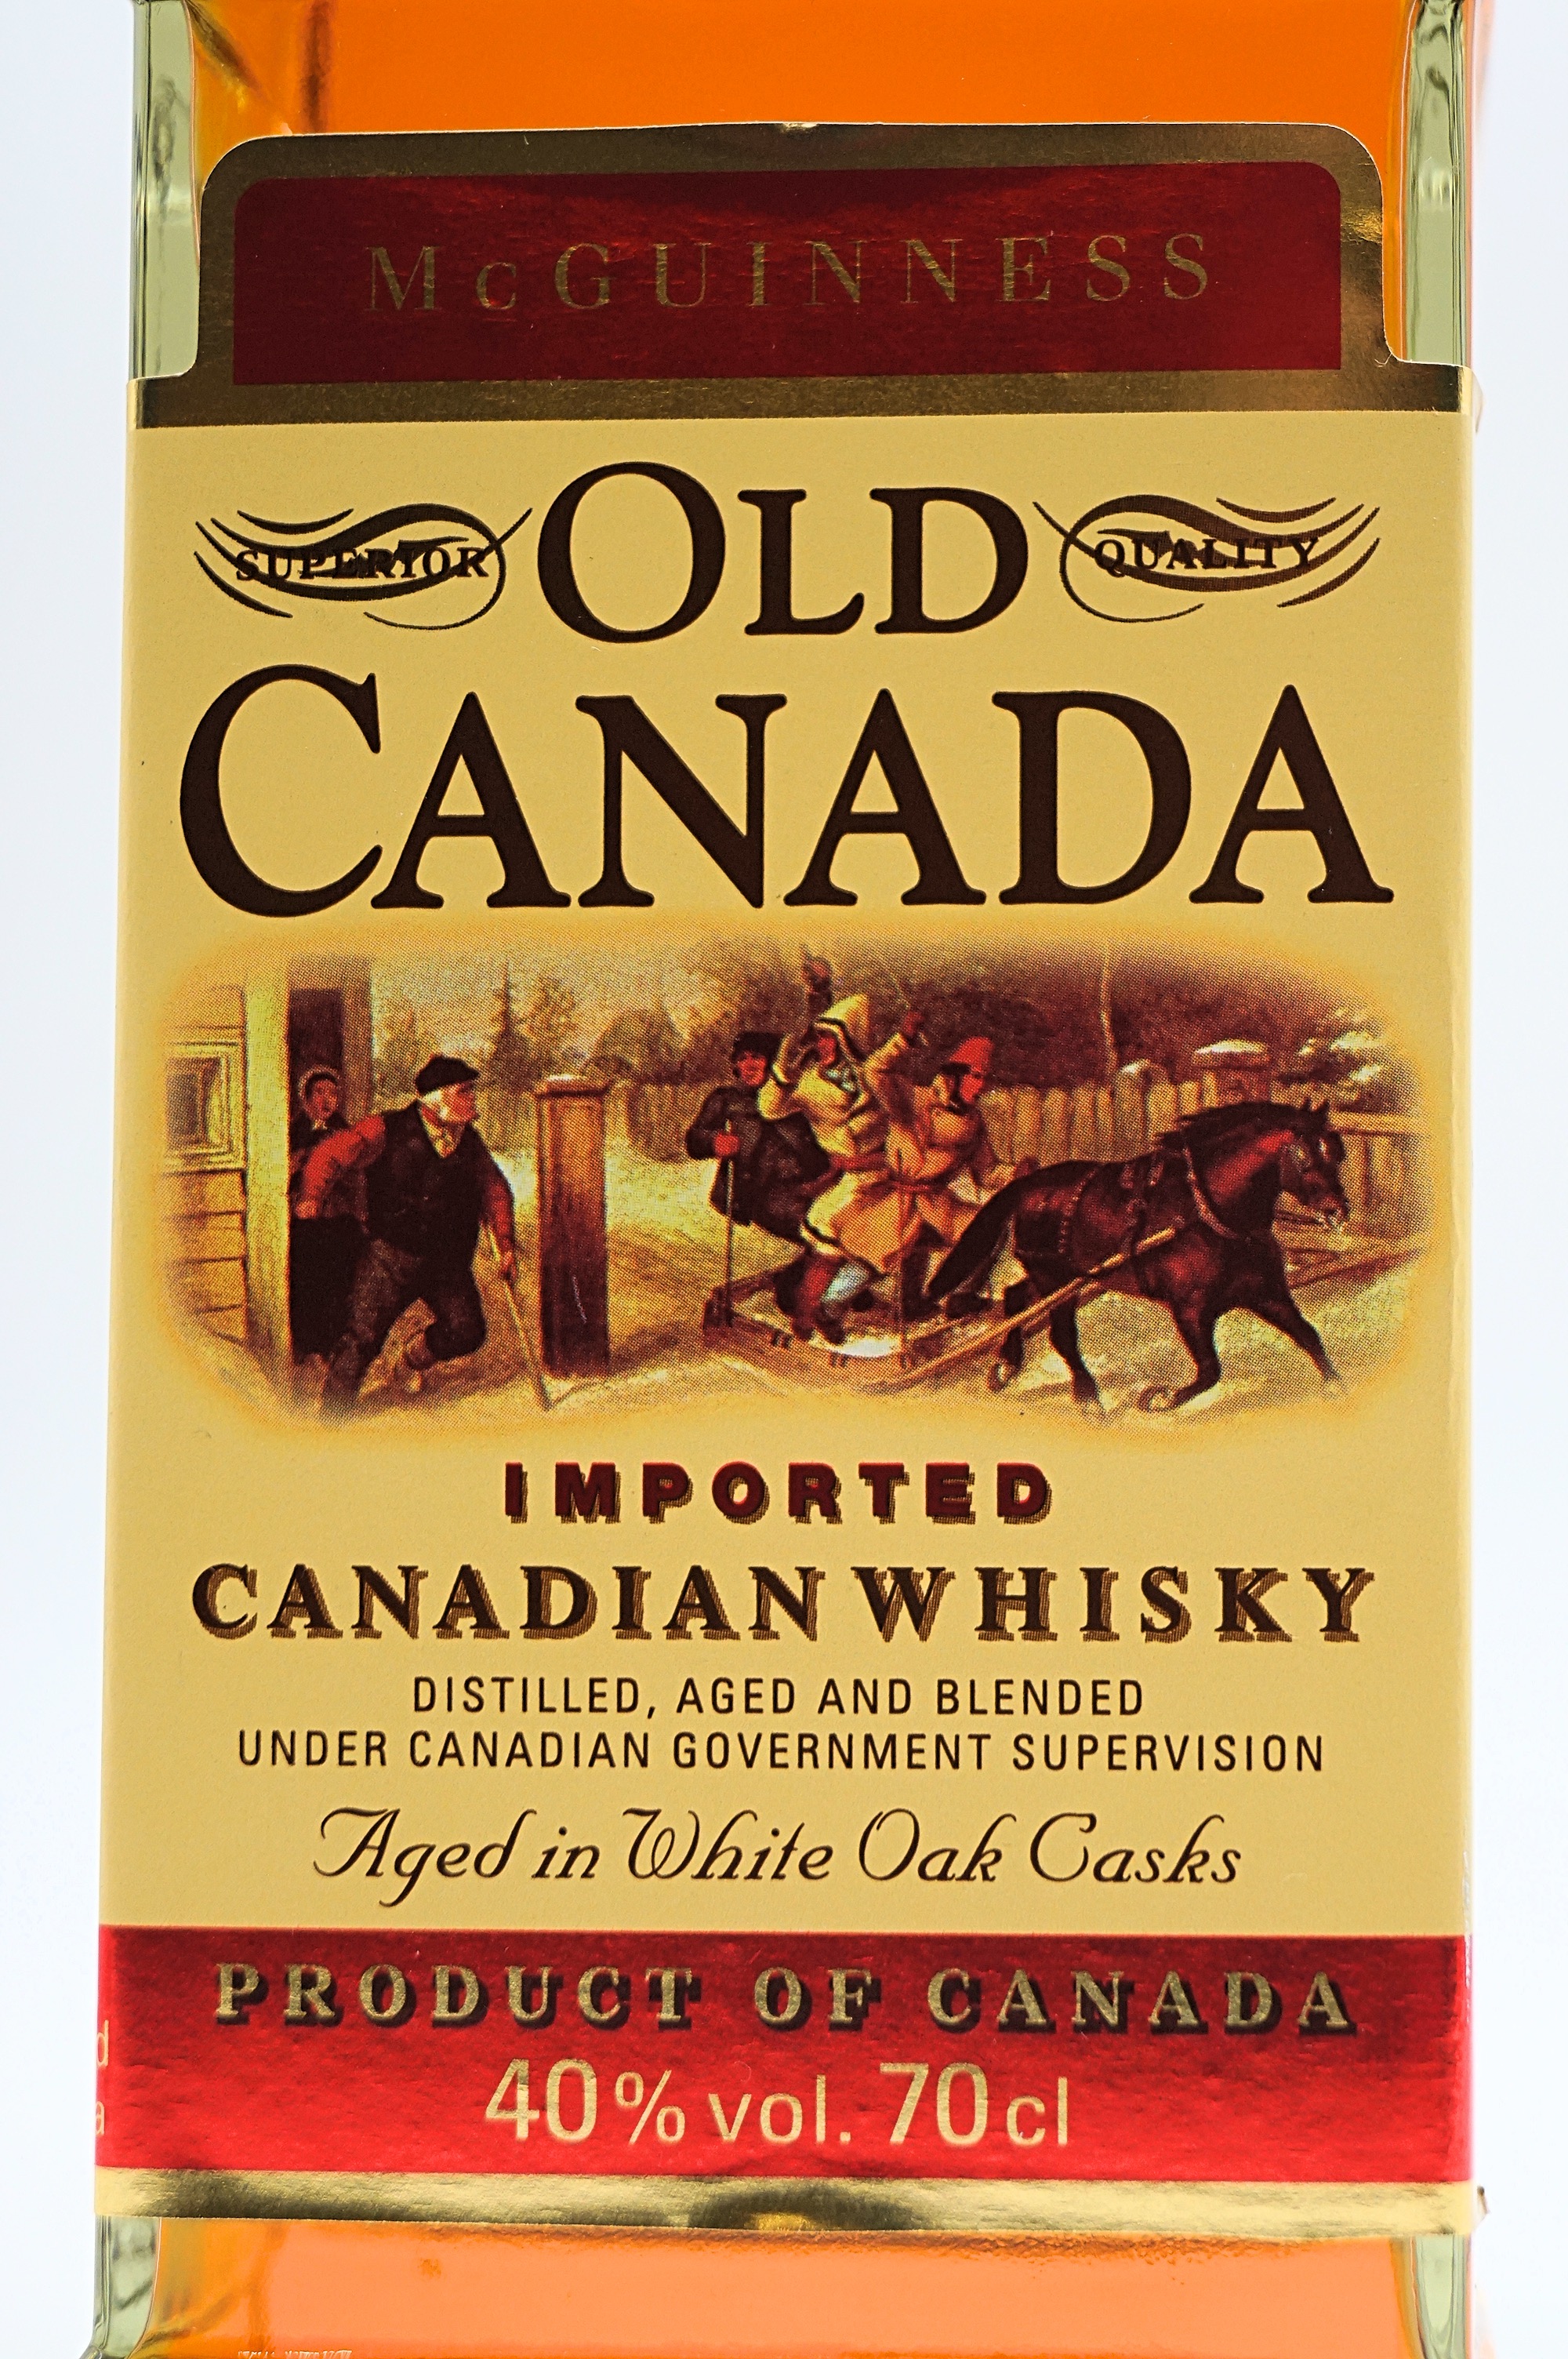 Old Canada imported Canadian Whisky